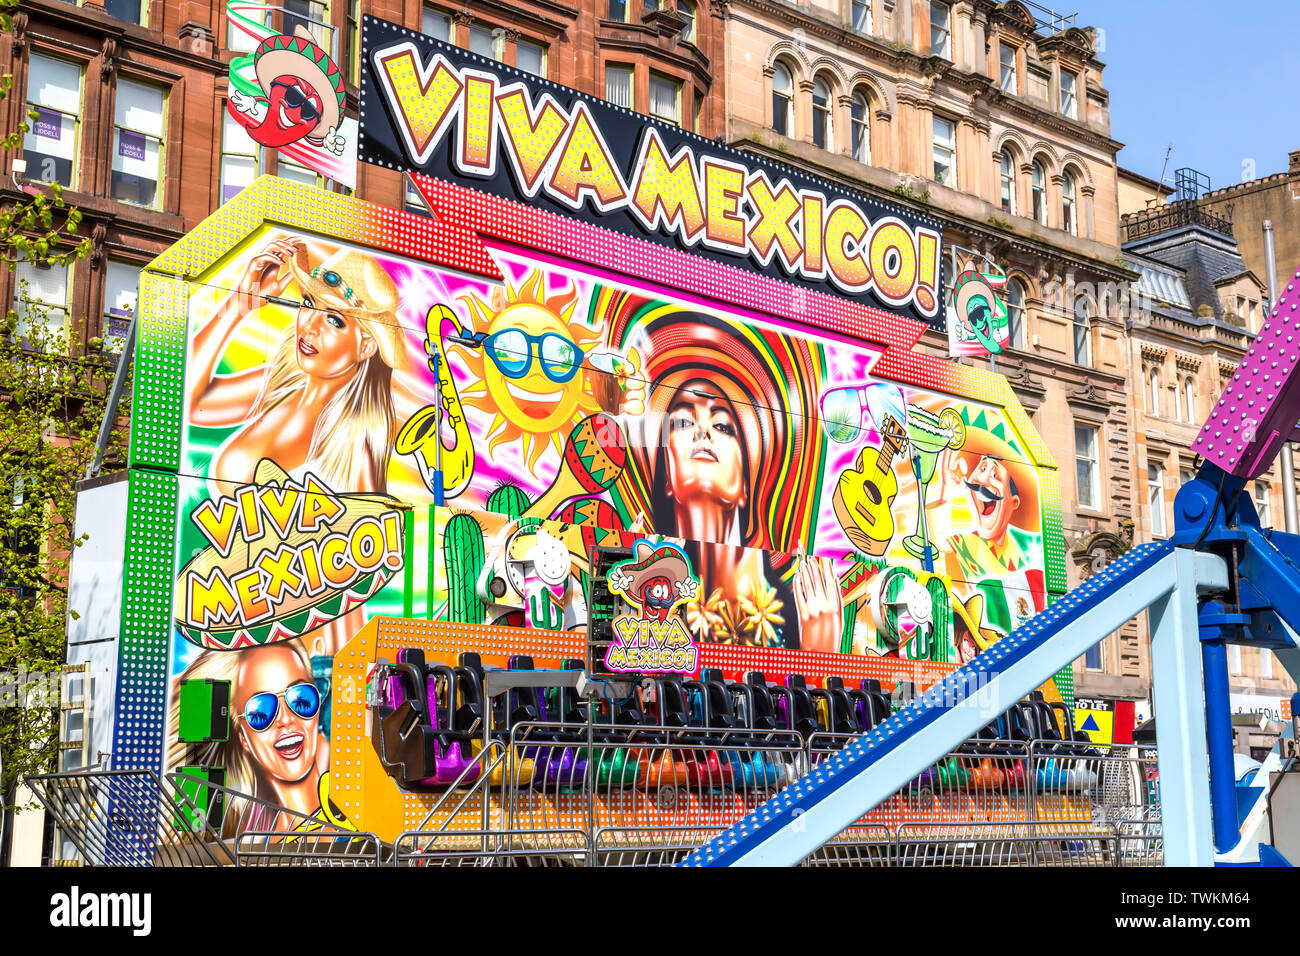 Fairground ride in Glasgow on St. Enoch Square in the city centre, Scotland, UK Stock Photo